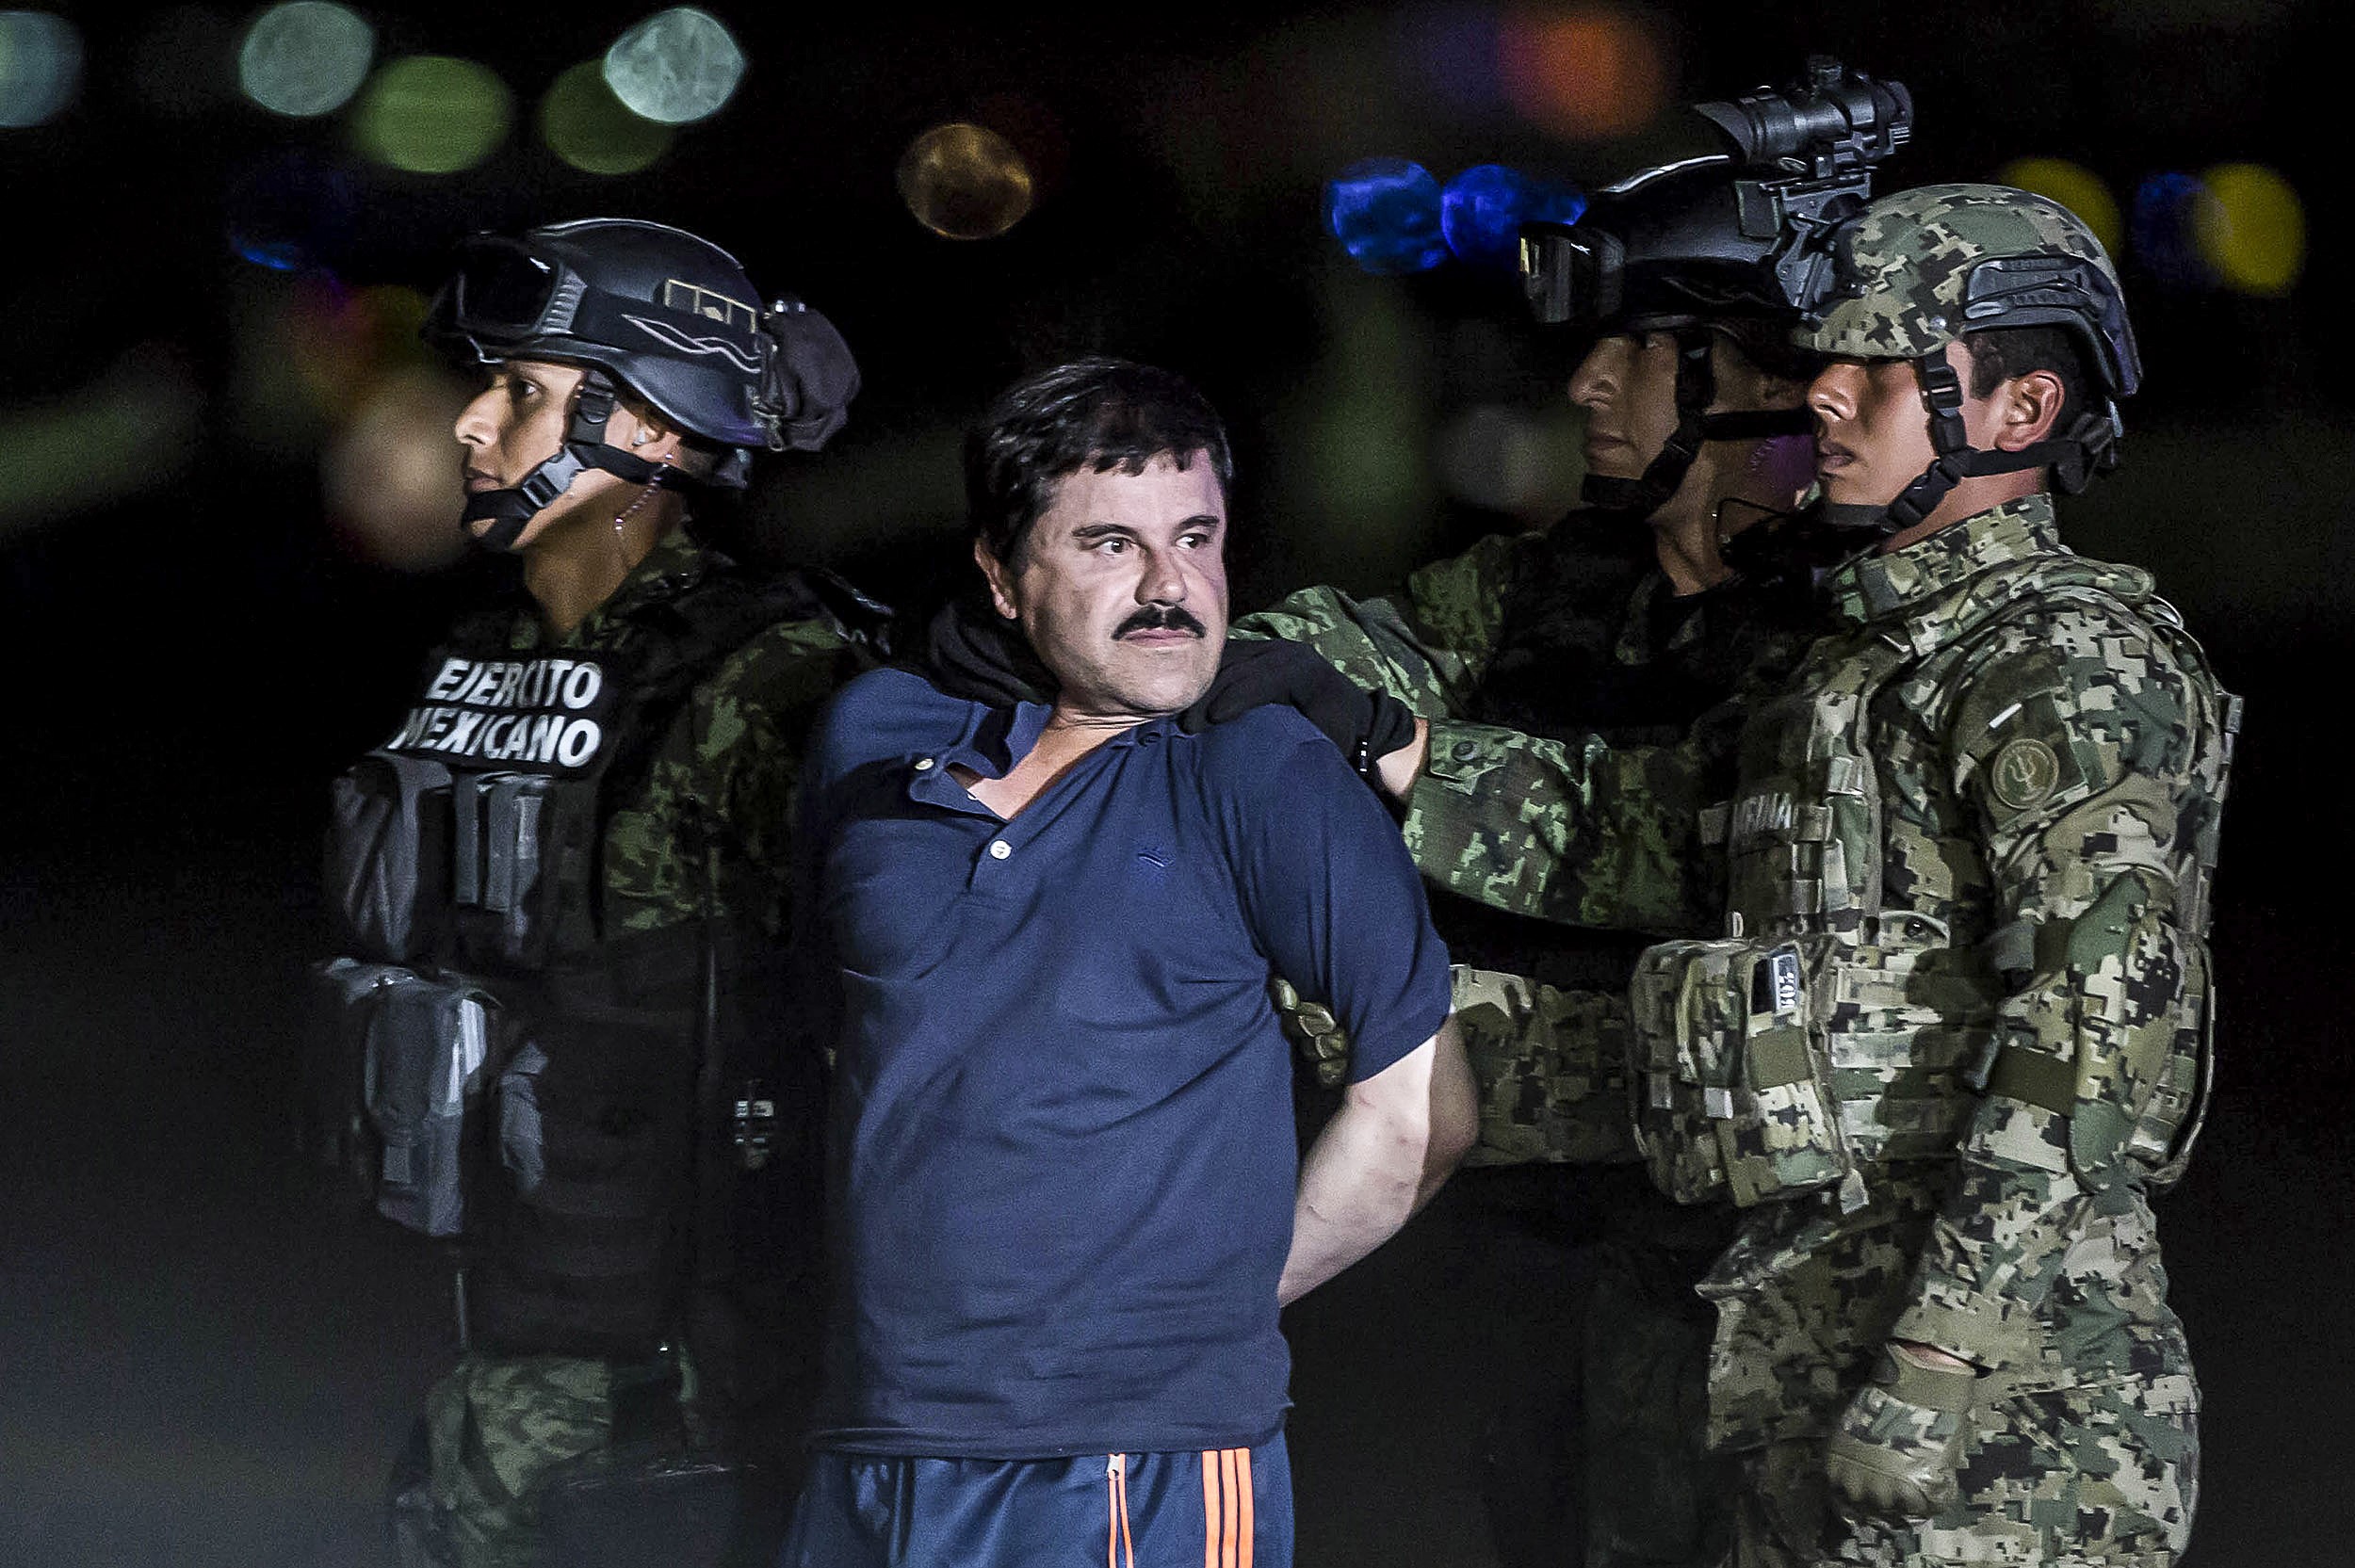 Joaquin Guzman Loera, also known as "El Chapo" is transported to Maximum Security Prison of El Altiplano in Mexico City, Mexico on January 08, 2016. (Daniel Cardenas/Anadolu Agency—Getty Images)